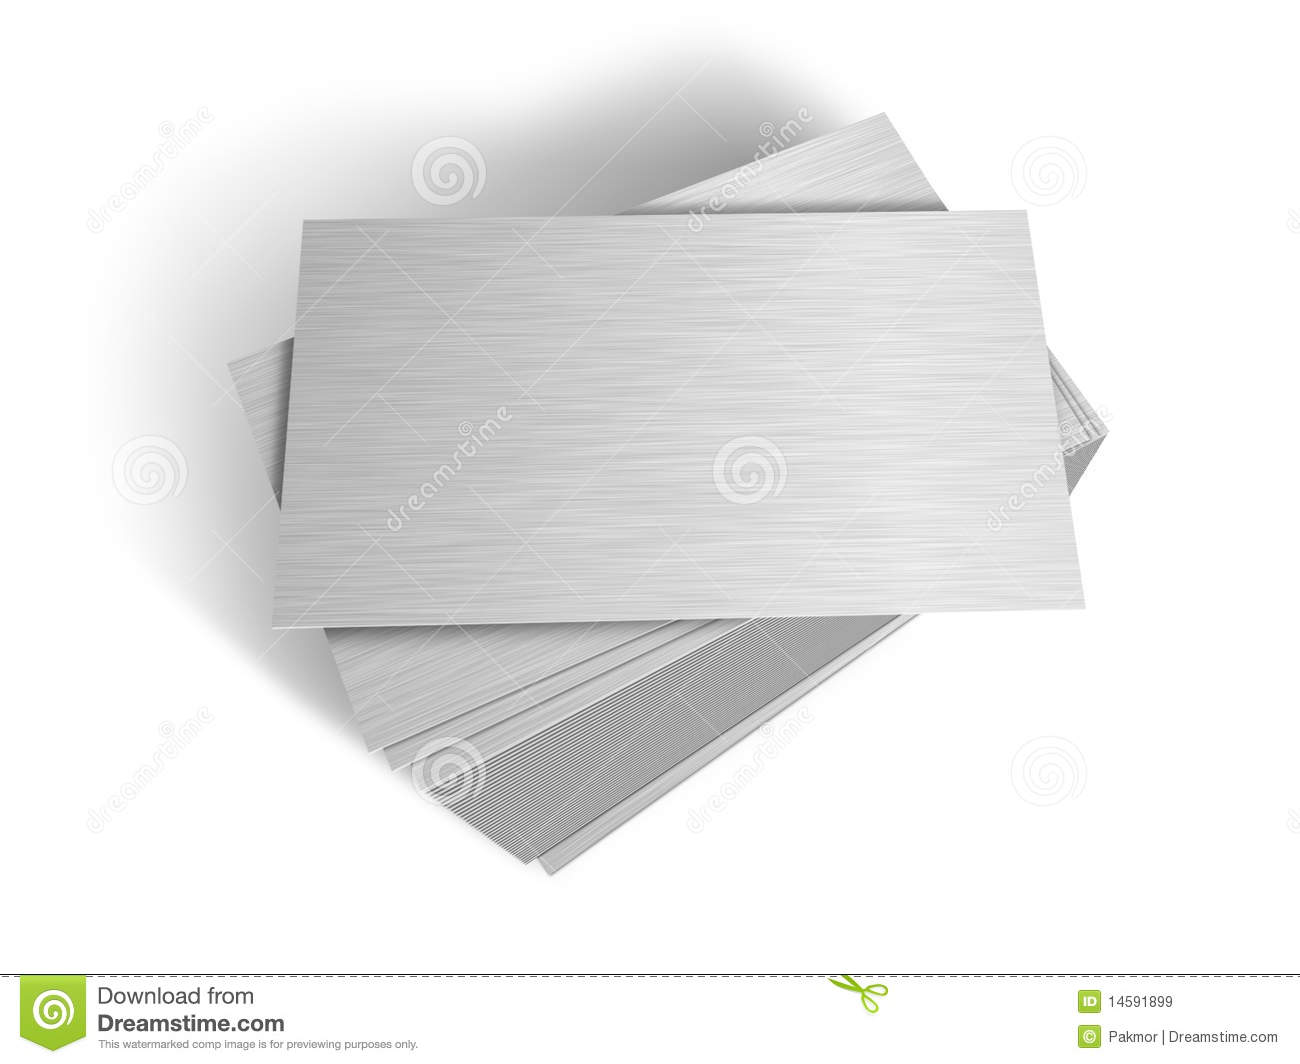 Stacked Metal Plates Royalty Free Stock Images   Image  14591899